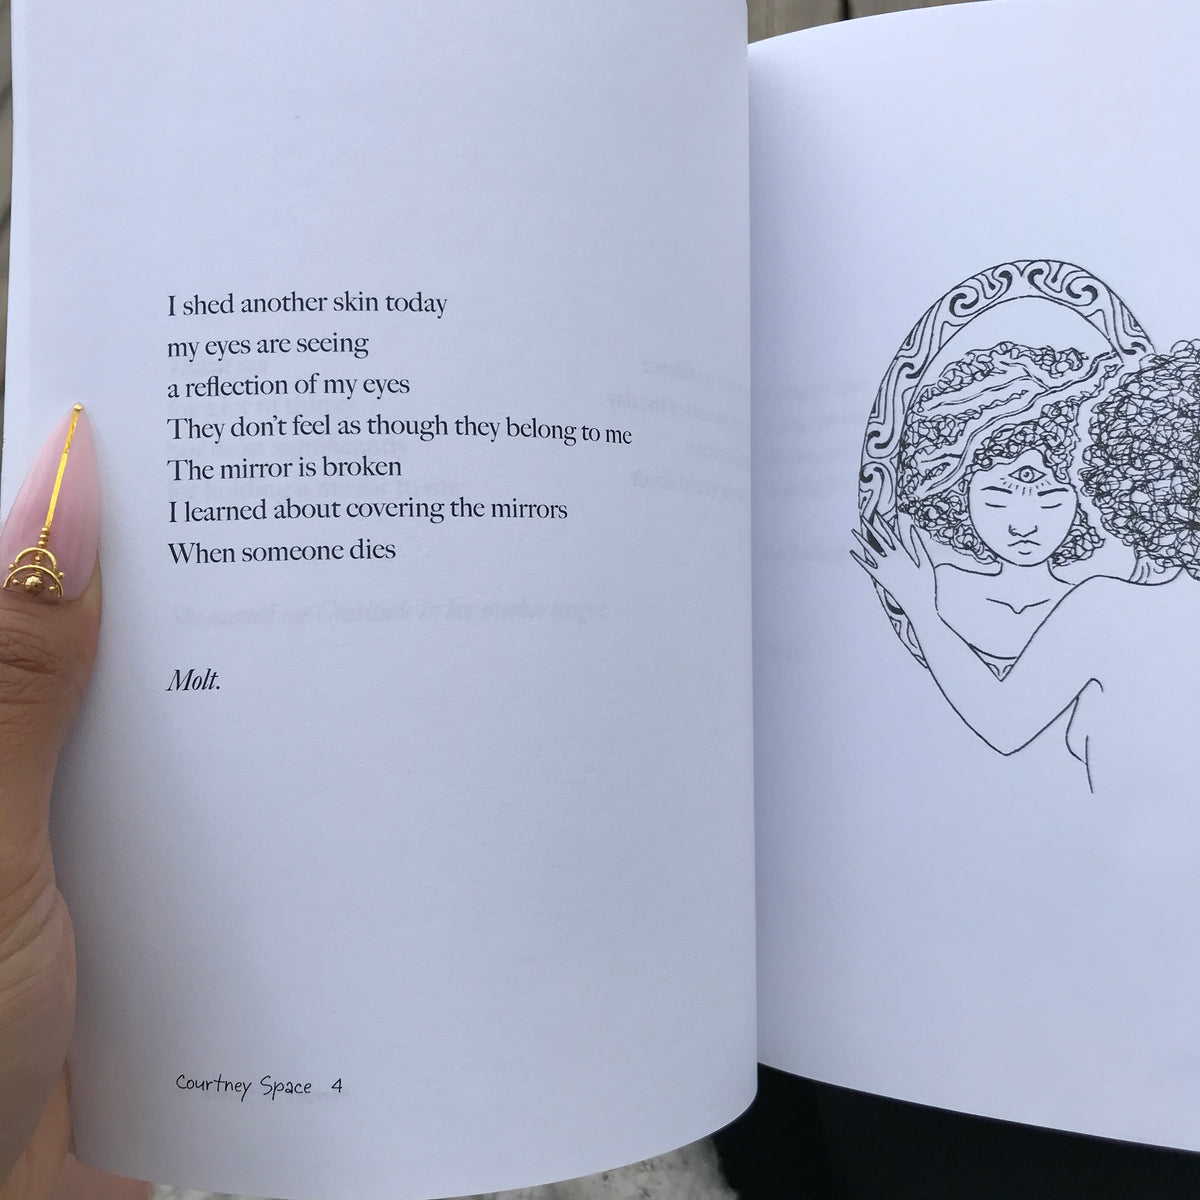 Mirrors & Smoke by Courtney Space. Through poetry, prose and illustrations, I share my spiritual journey to self-discovery, and how I navigated addiction, learned mental wellness, self-love and resilience. Illustrated by Mia Ohki